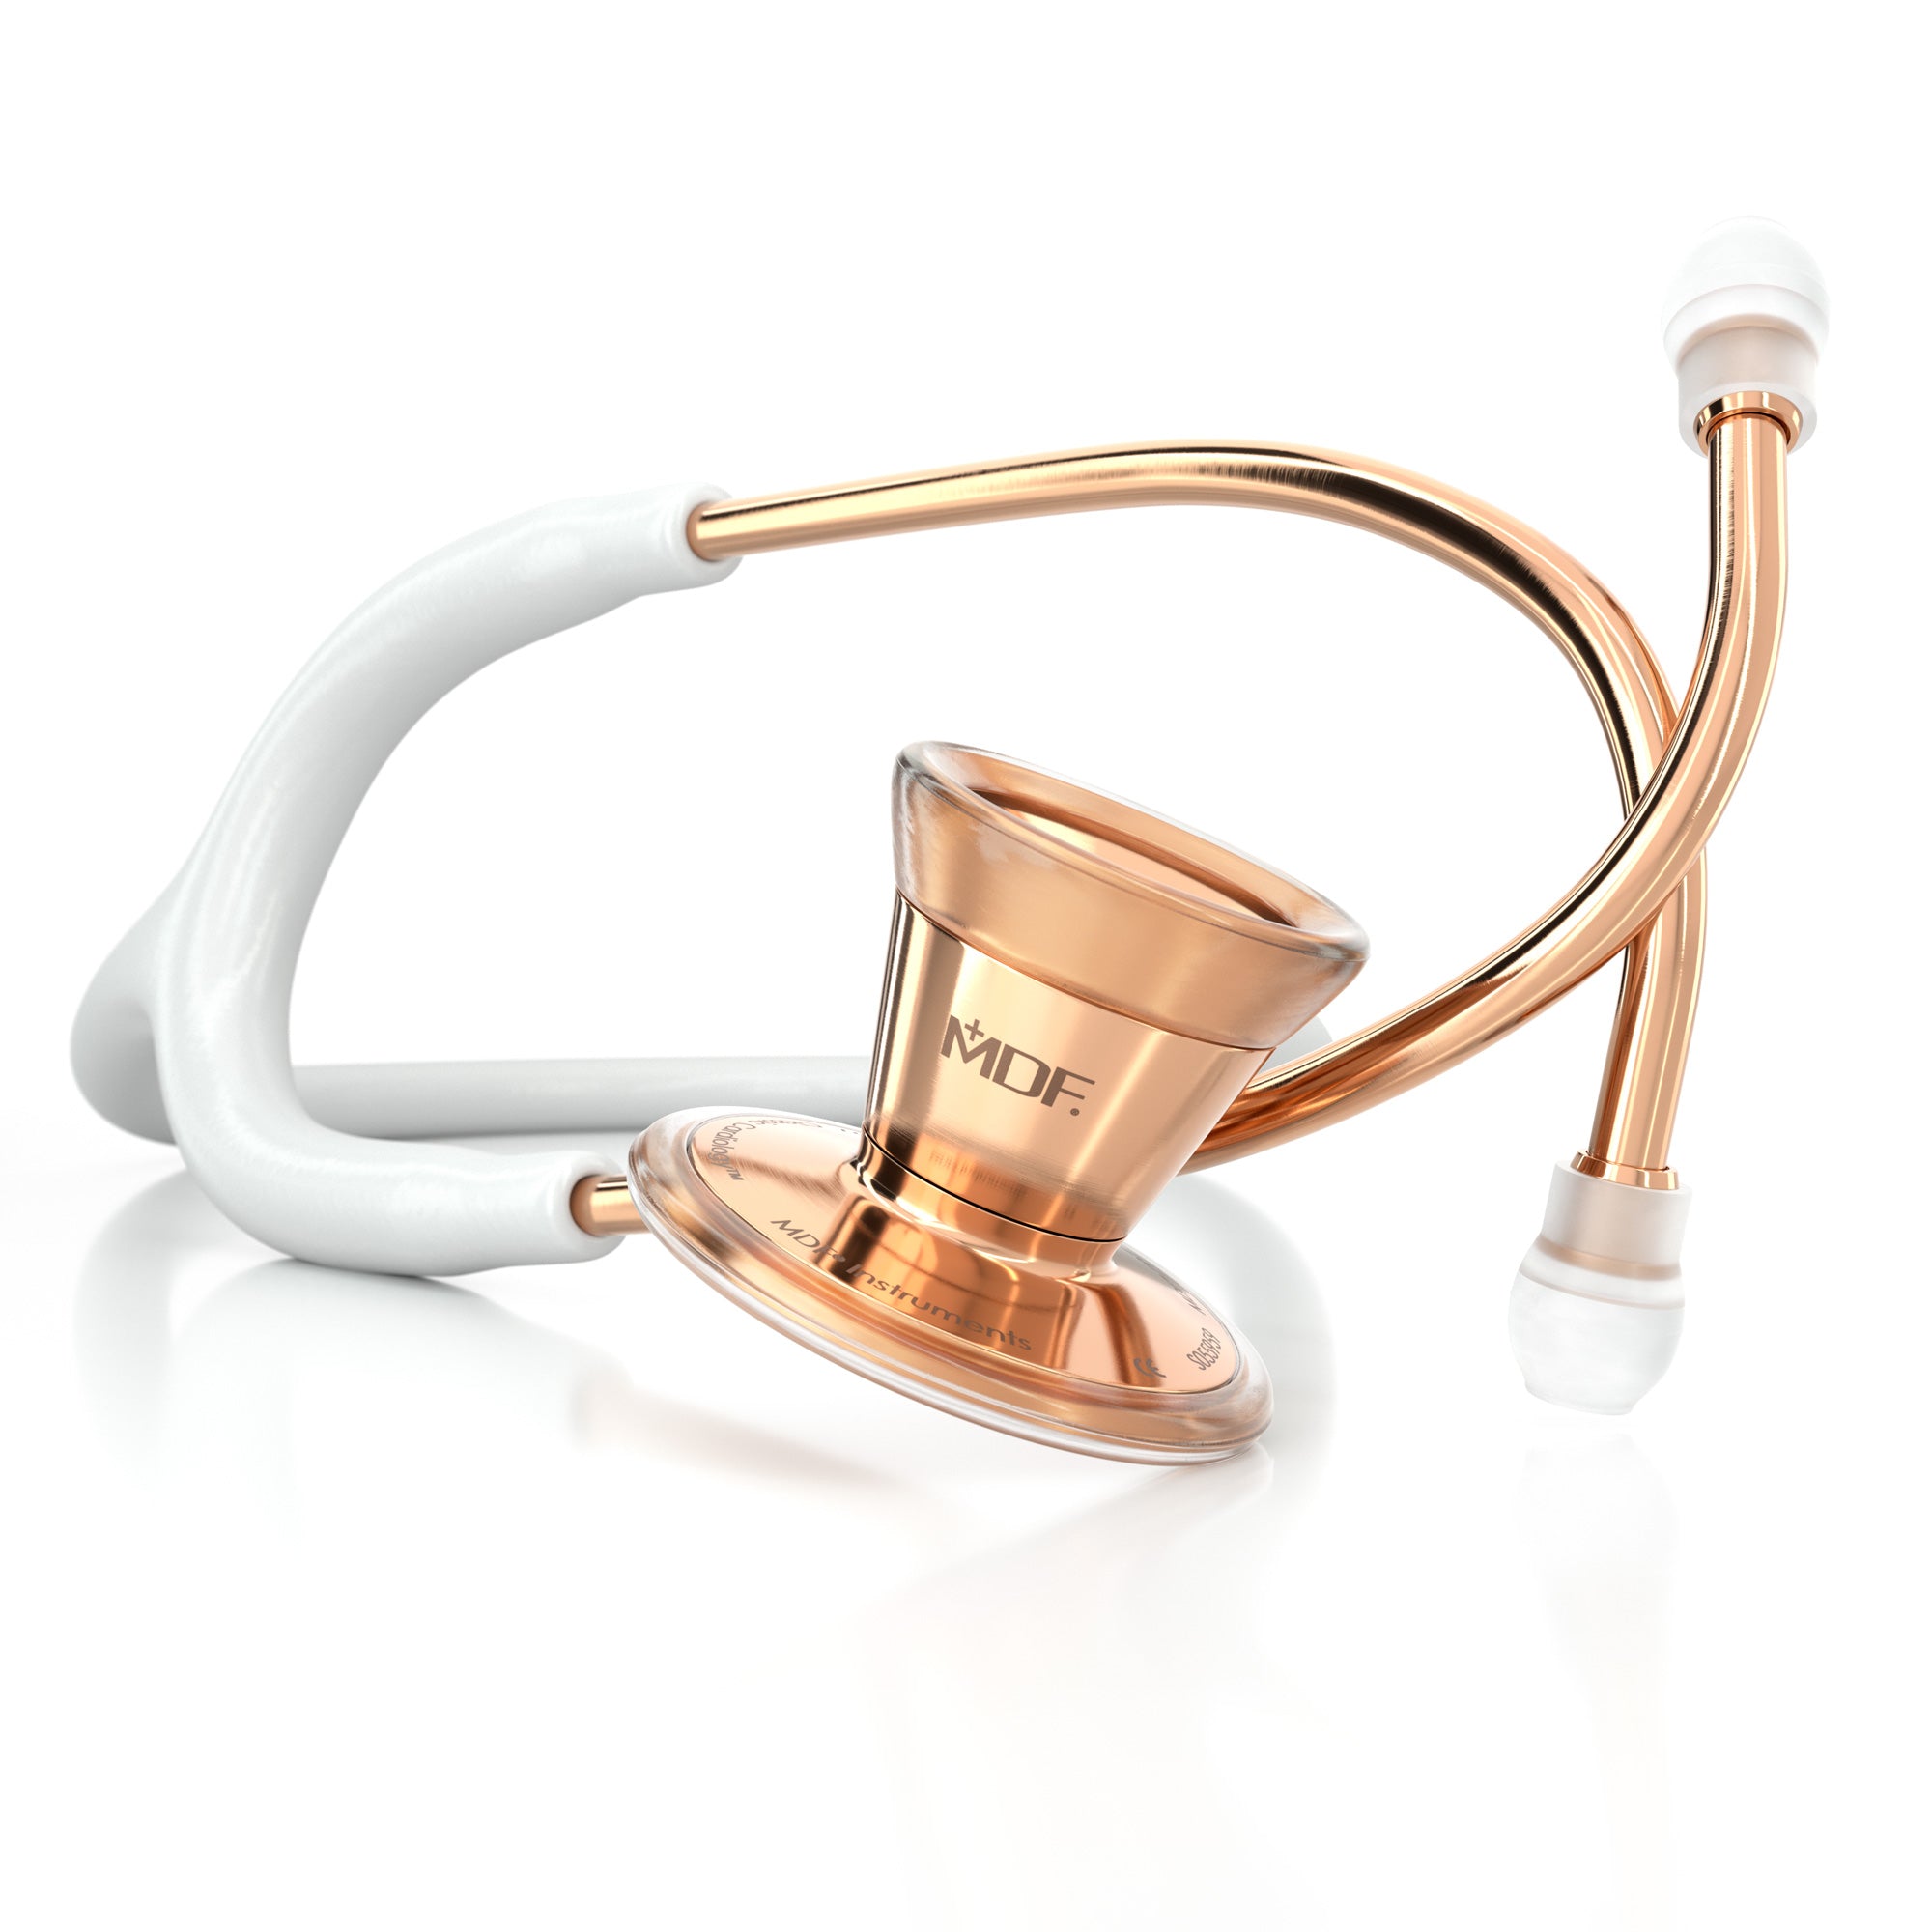 ProCardial® Stainless Steel Cardiology Stethoscope - White/Rose Gold - MDF Instruments Official Store - No - Stethoscope